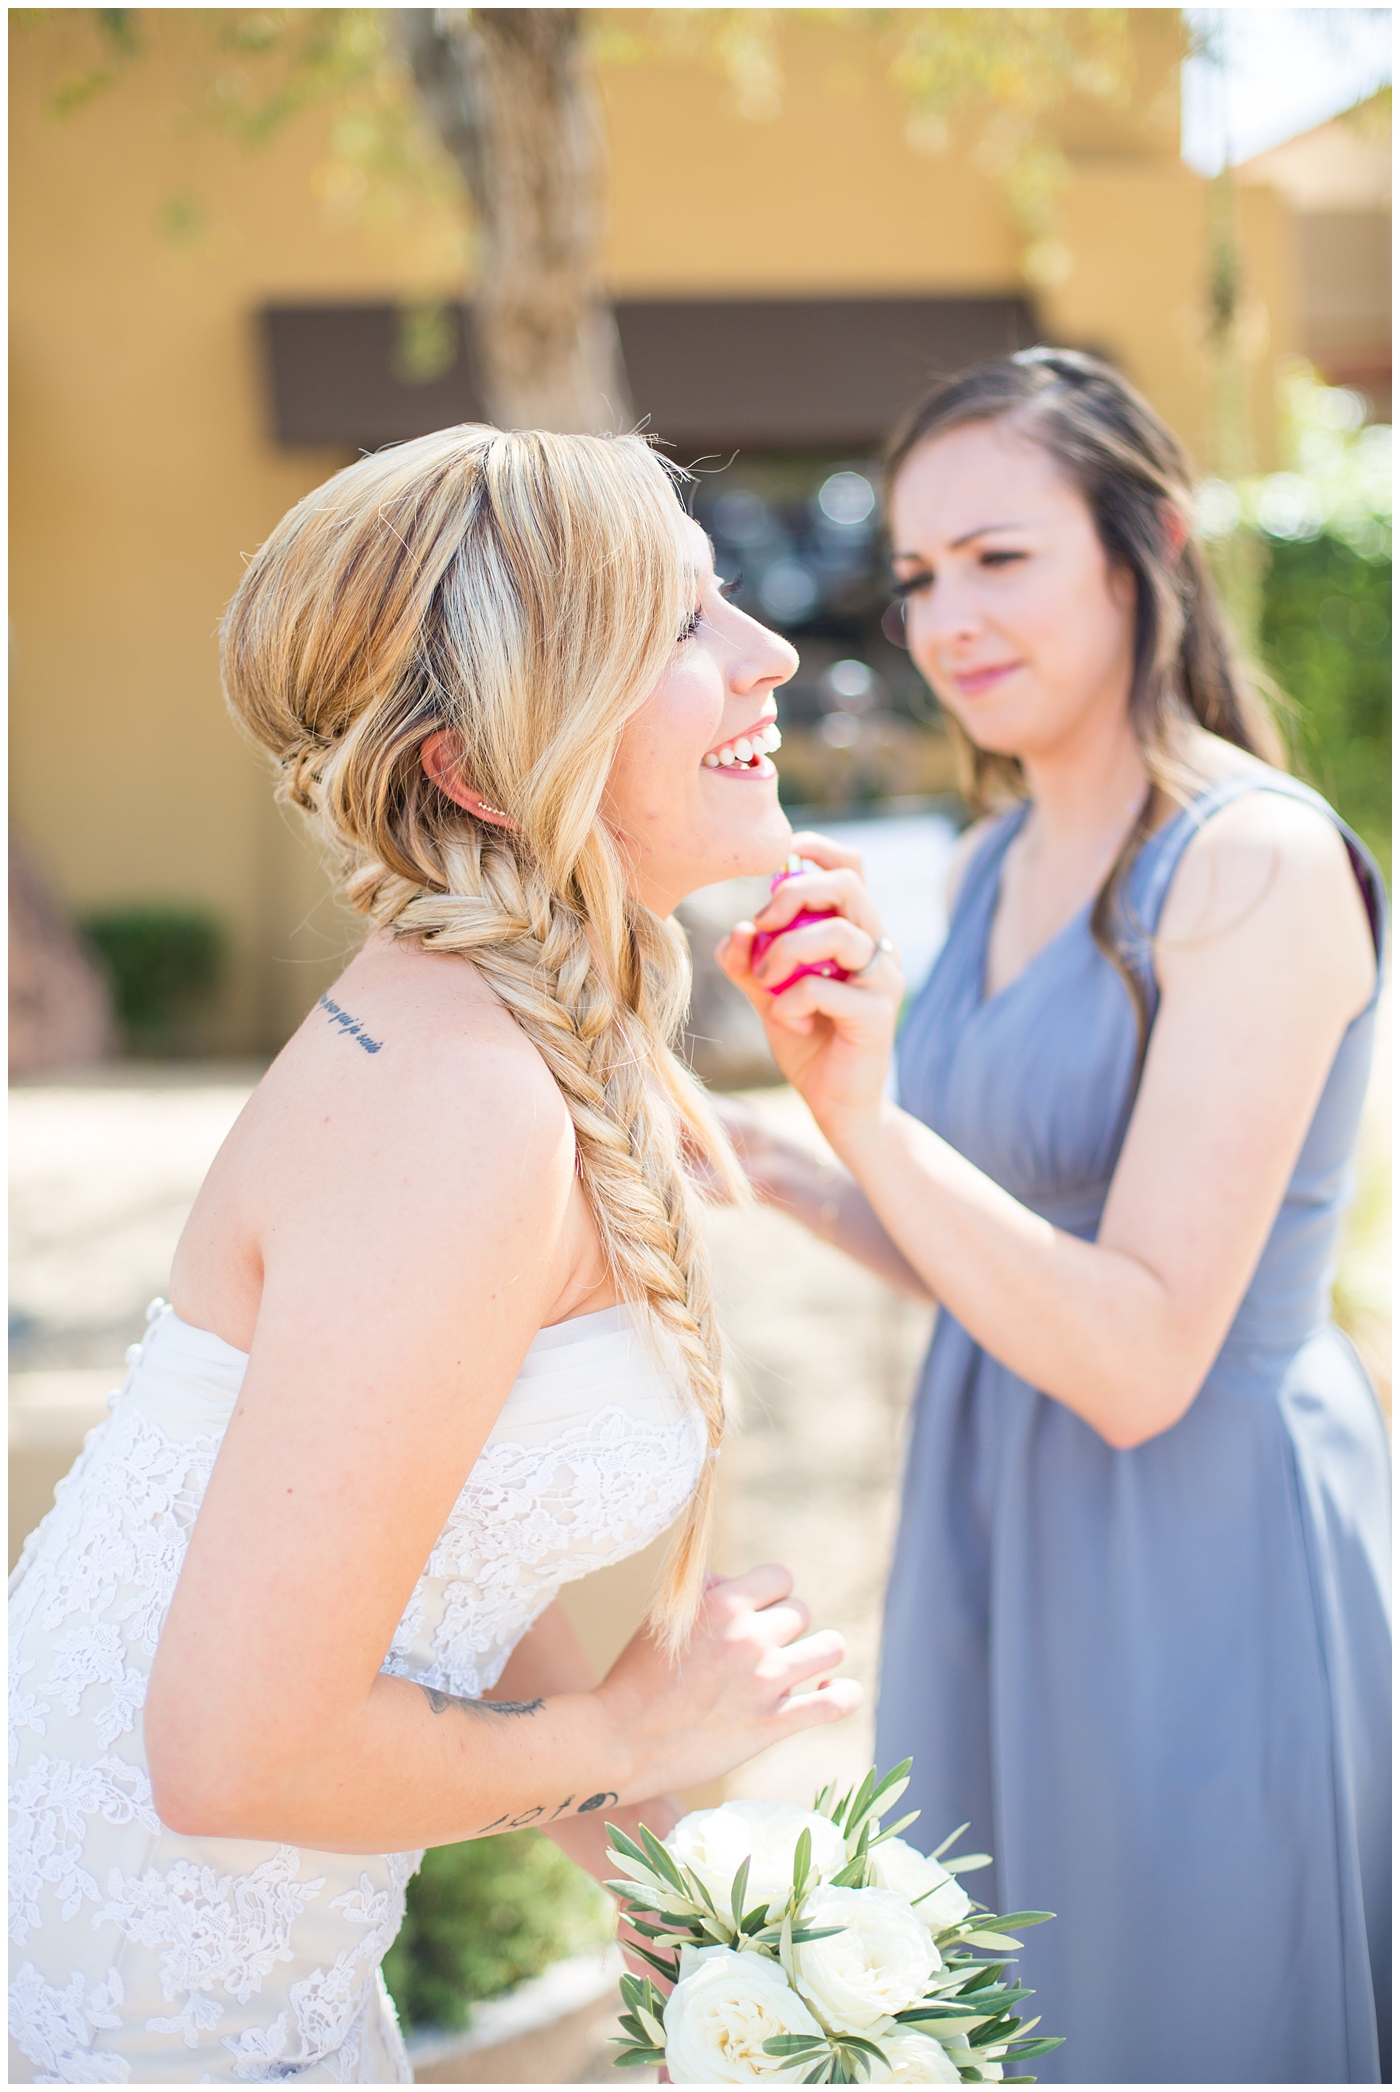 bride with fishtail braid and strapless dress with white rose and greenery bouquet with bridesmaids in slate gray long dresses getting ready on wedding day